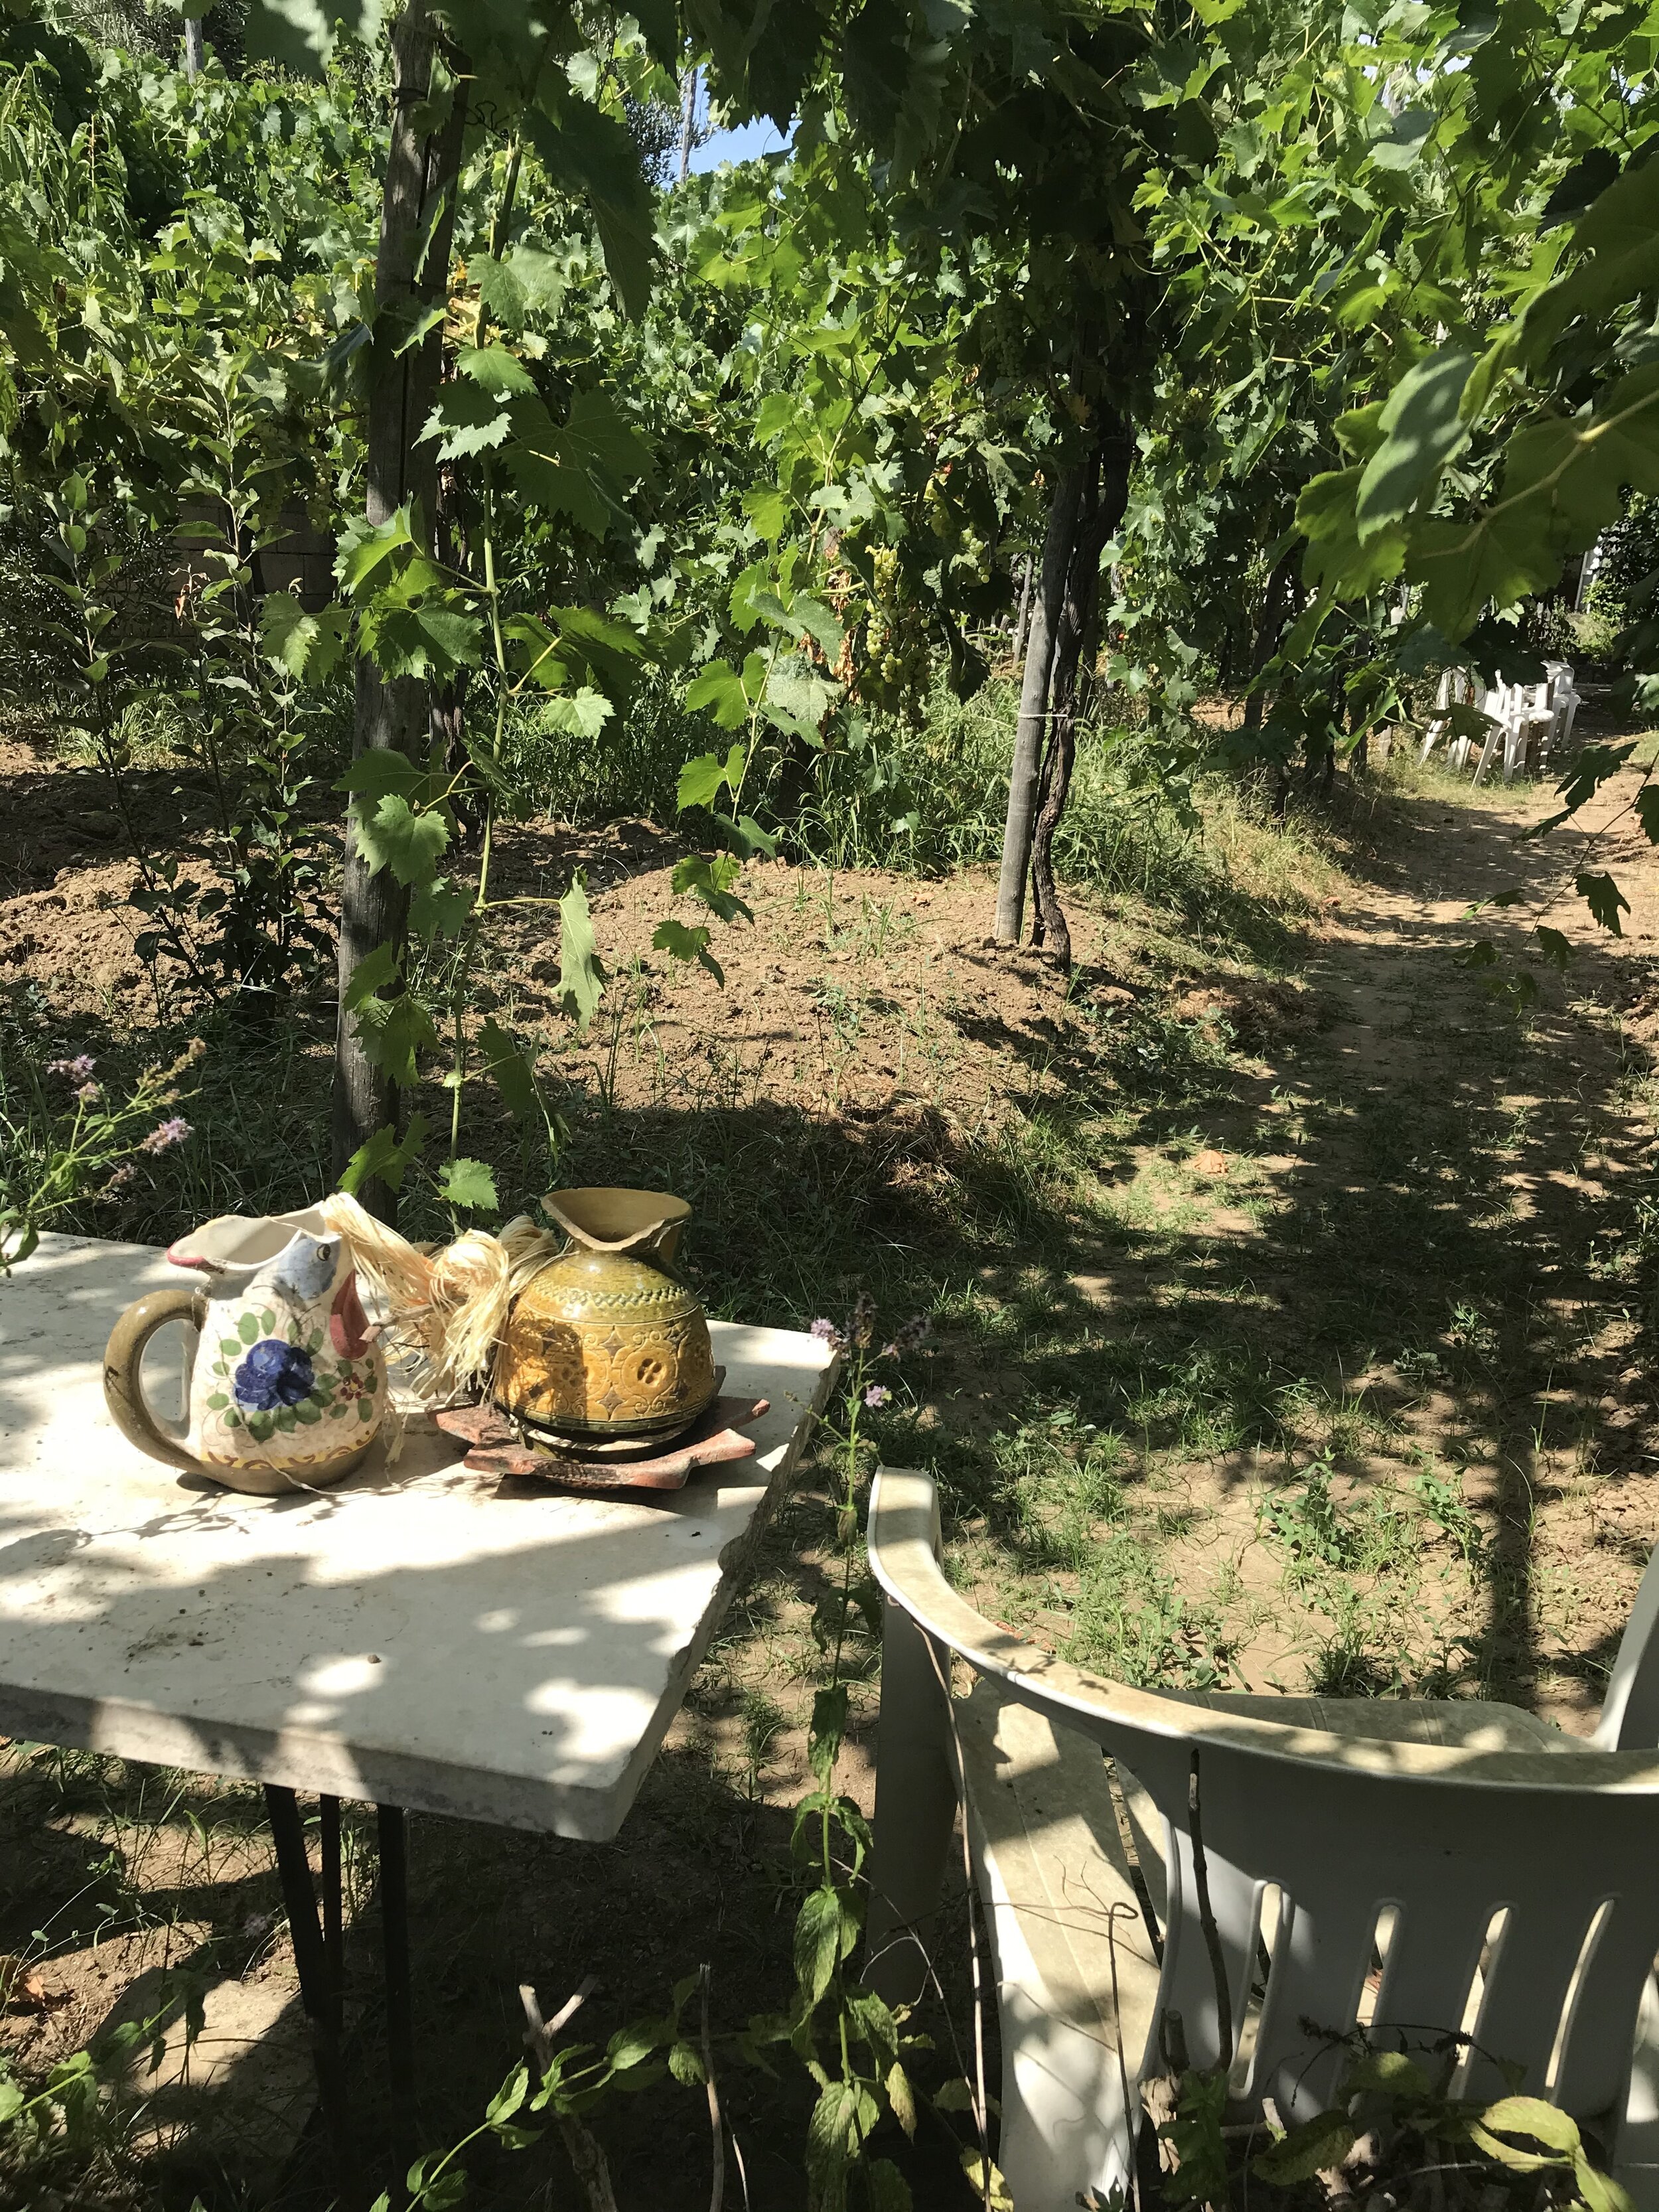  CAPRI, Napoli. August 4th, 2020. PICTURED: A resident’s afternoon tea sits without imbiber in the afternoon sun under a grape arbor. 